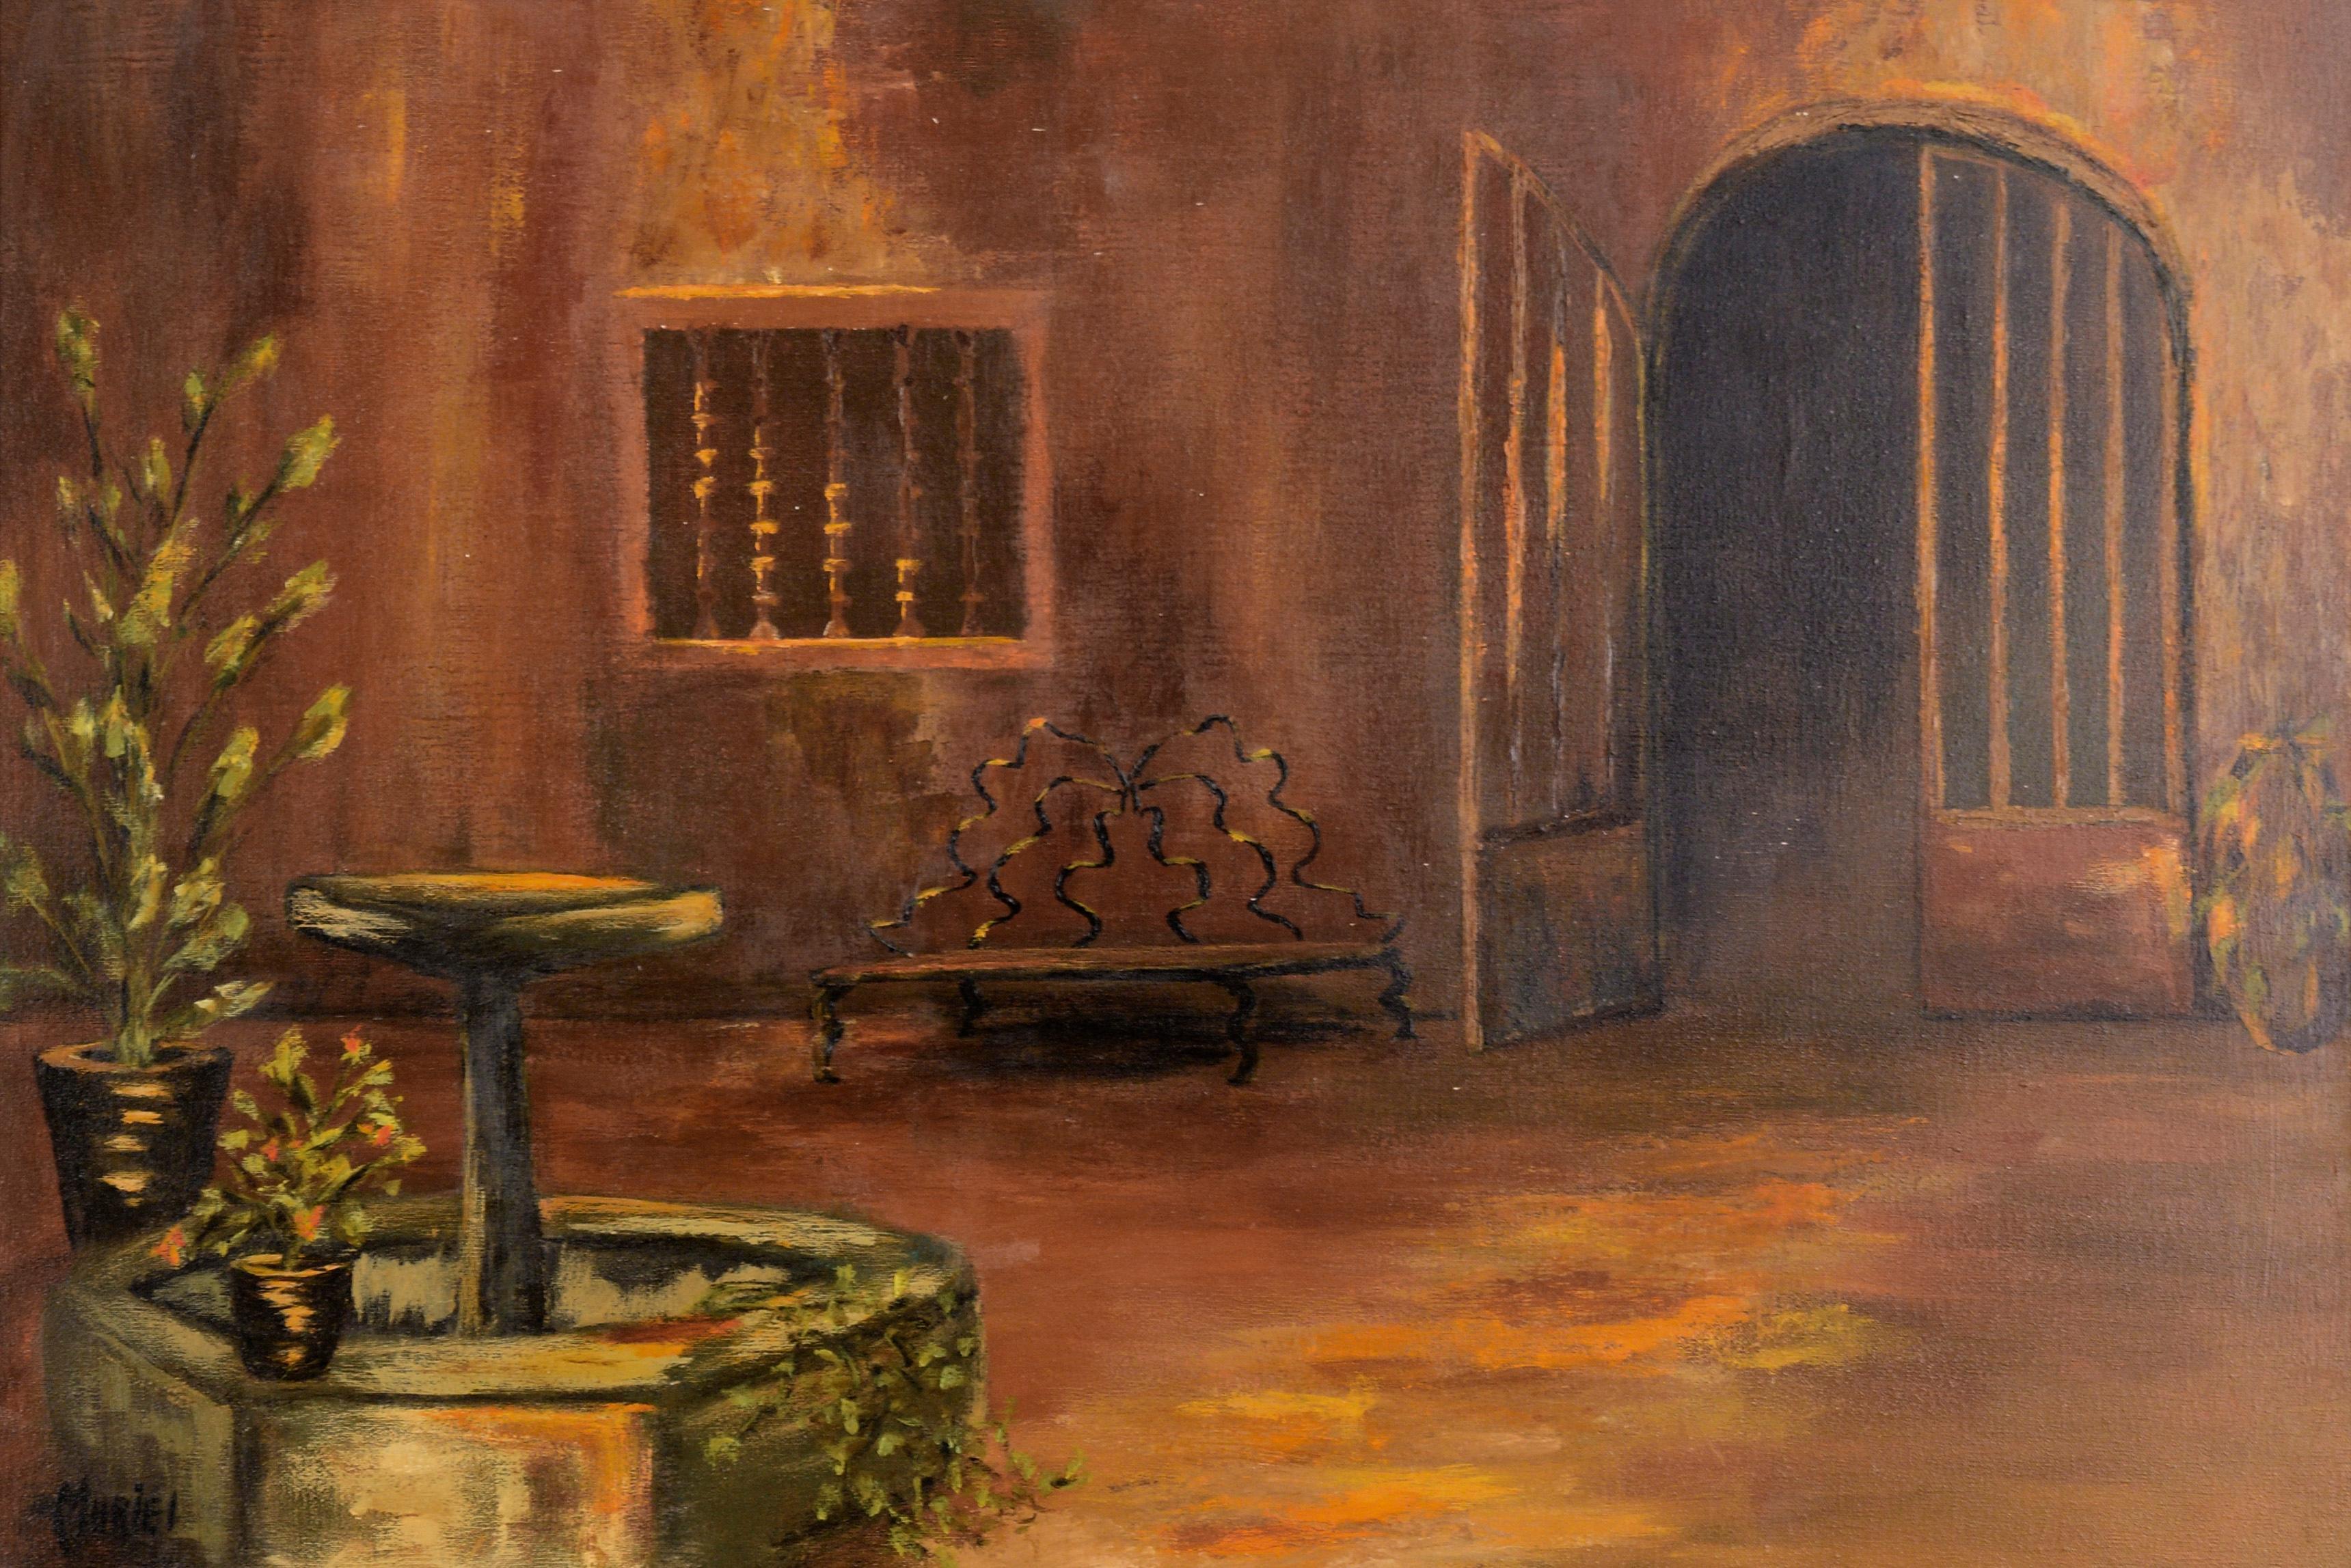 Courtyard with Fountain - Interior Landscape in Oil on Canvas - Painting by Muriel Kittock